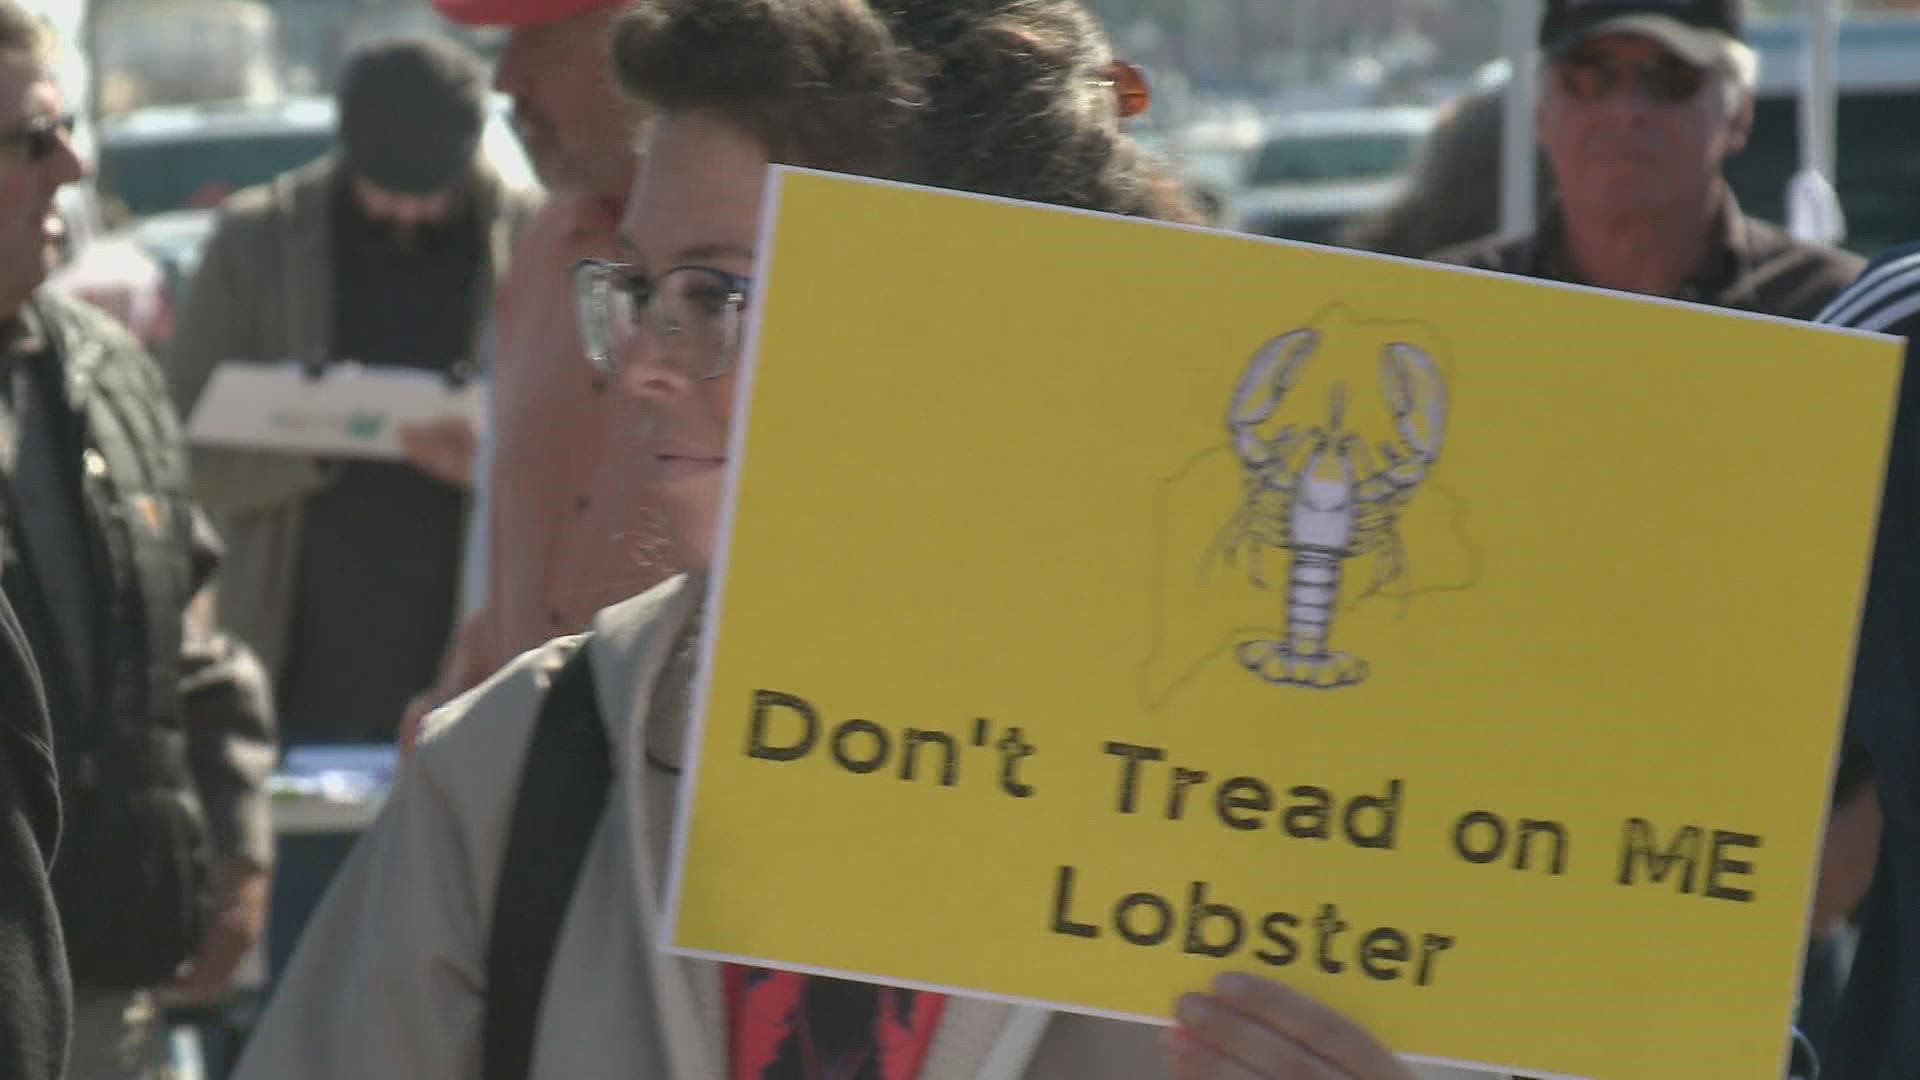 The AG's office has intervened in multiple lobster regulation cases since 2021, and said filing a new case with the same arguments would be "legally insignificant."